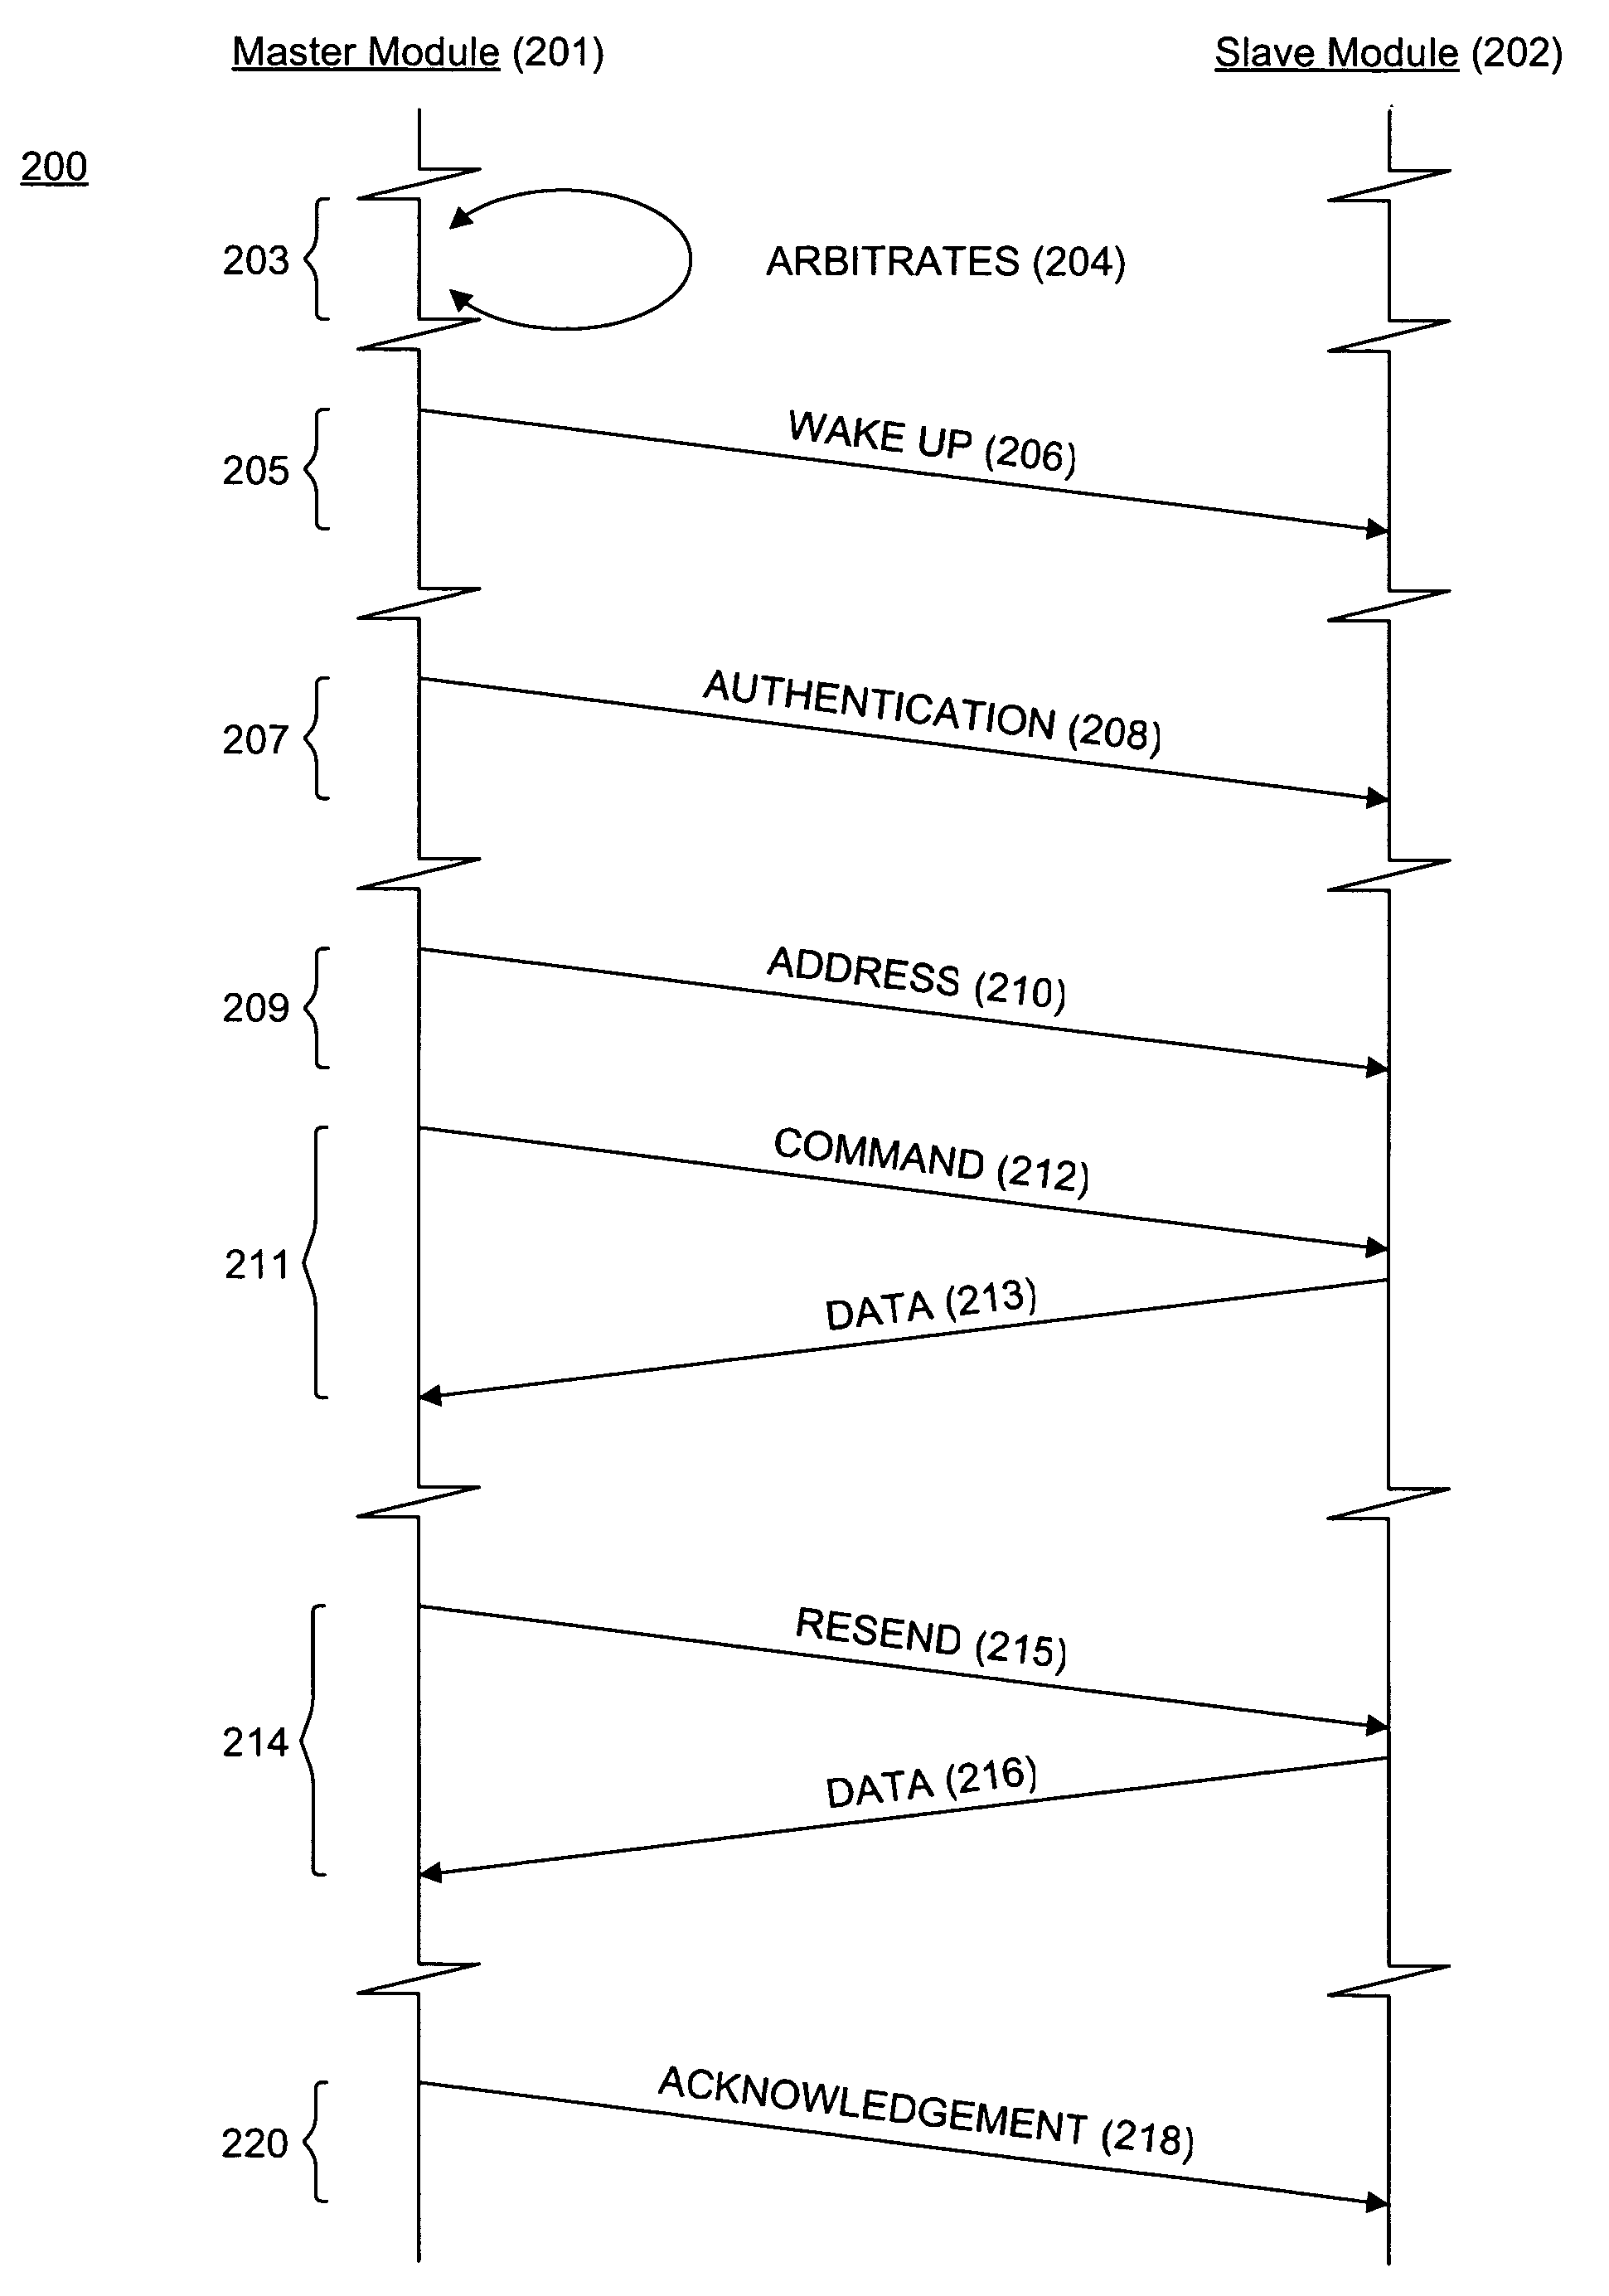 System and method for providing digital data communications over a wireless intra-body network